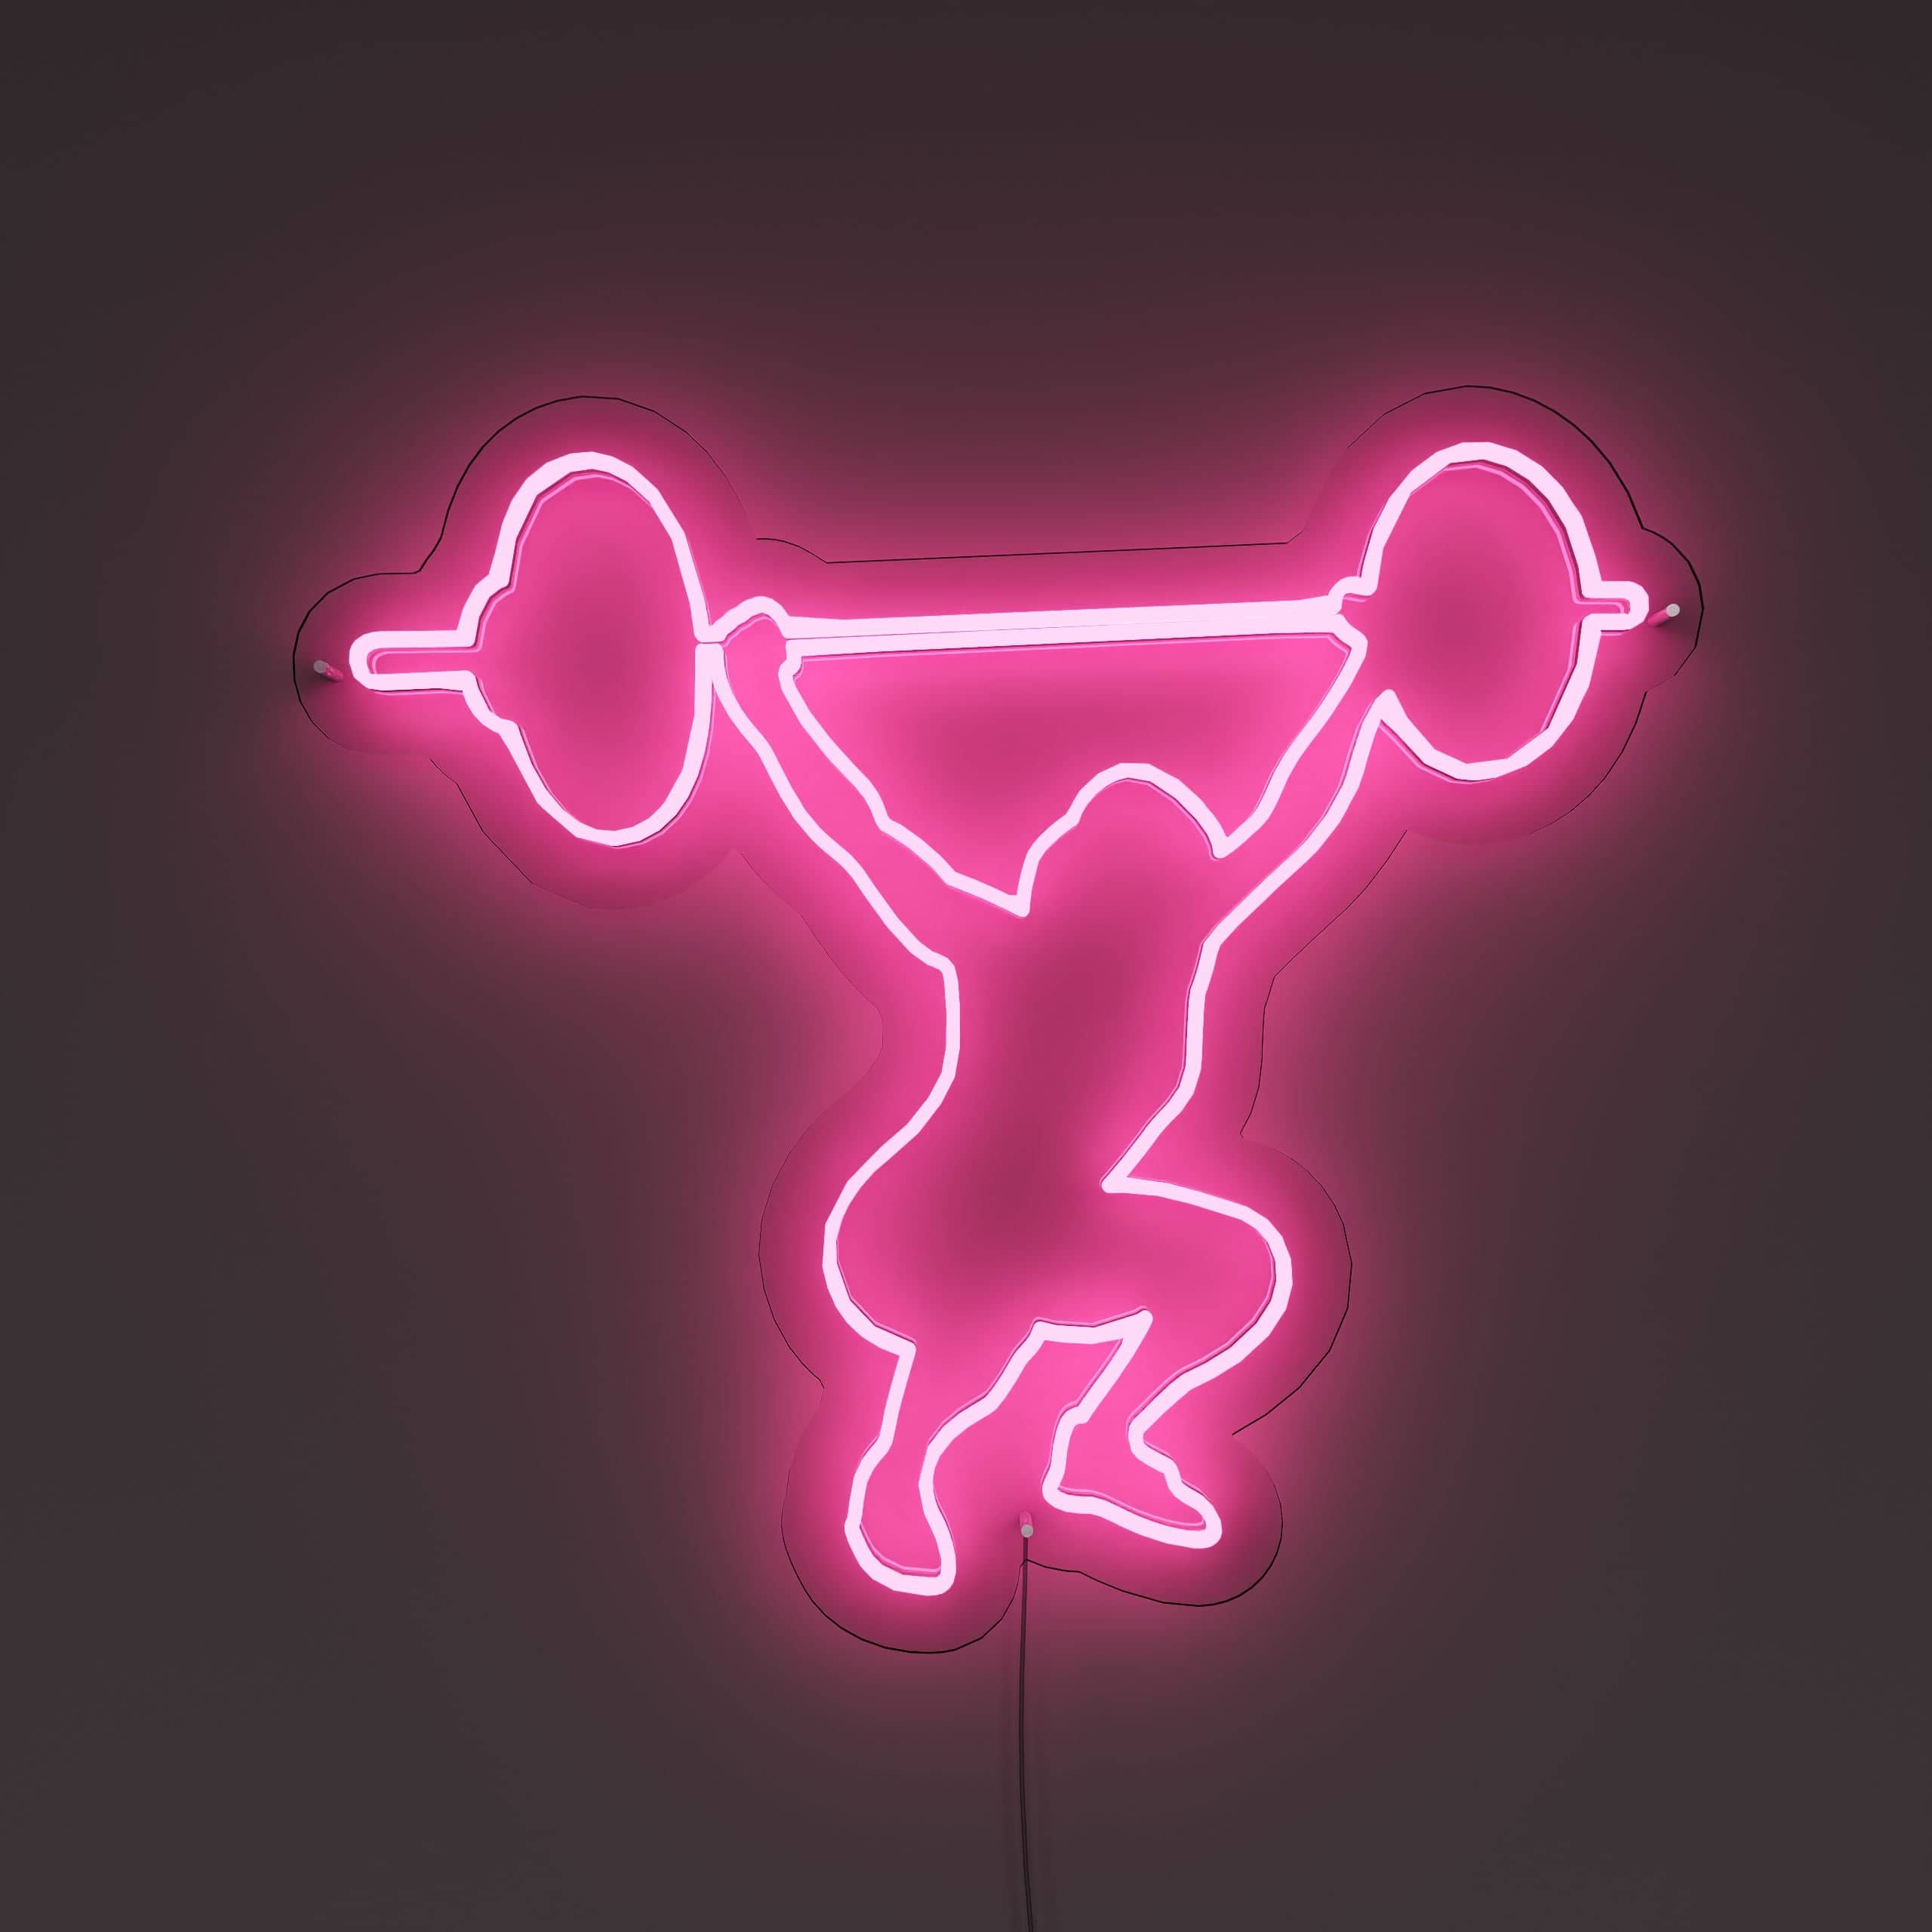 resistance-exercises-neon-sign-lite